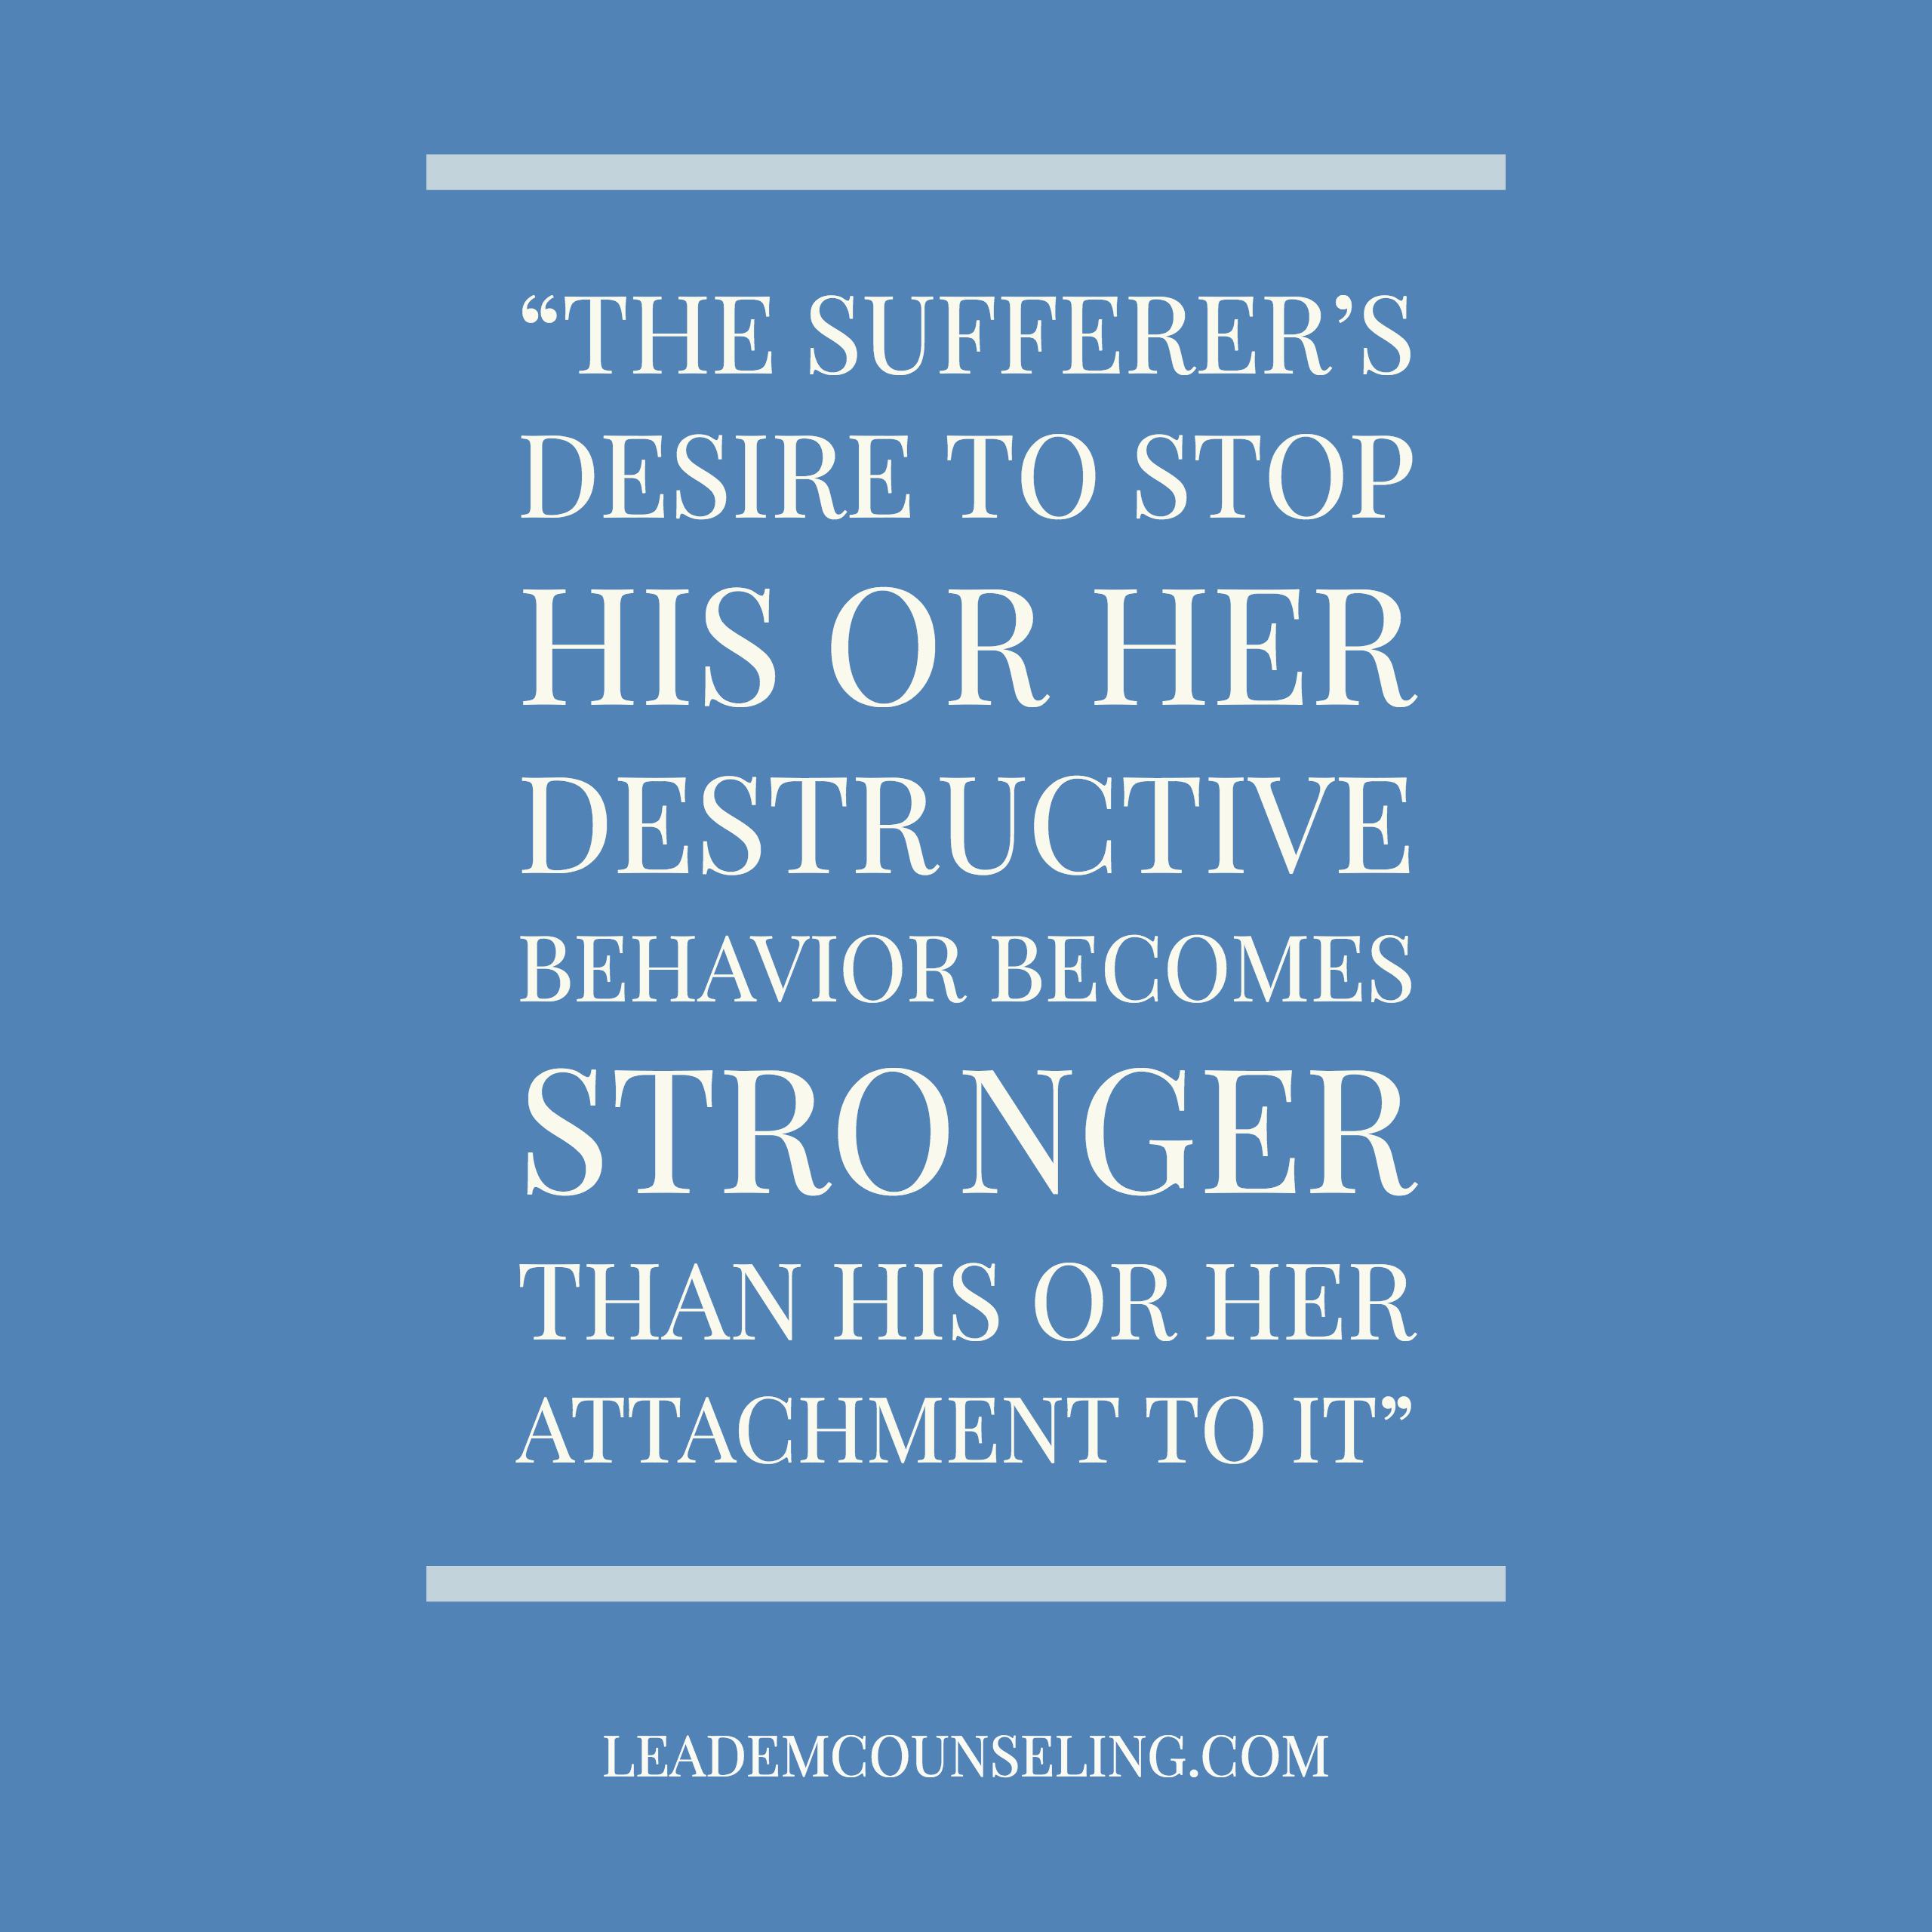 The sufferer’s desire to stop his or her destructive behavior becomes stronger than his or her attachment to it